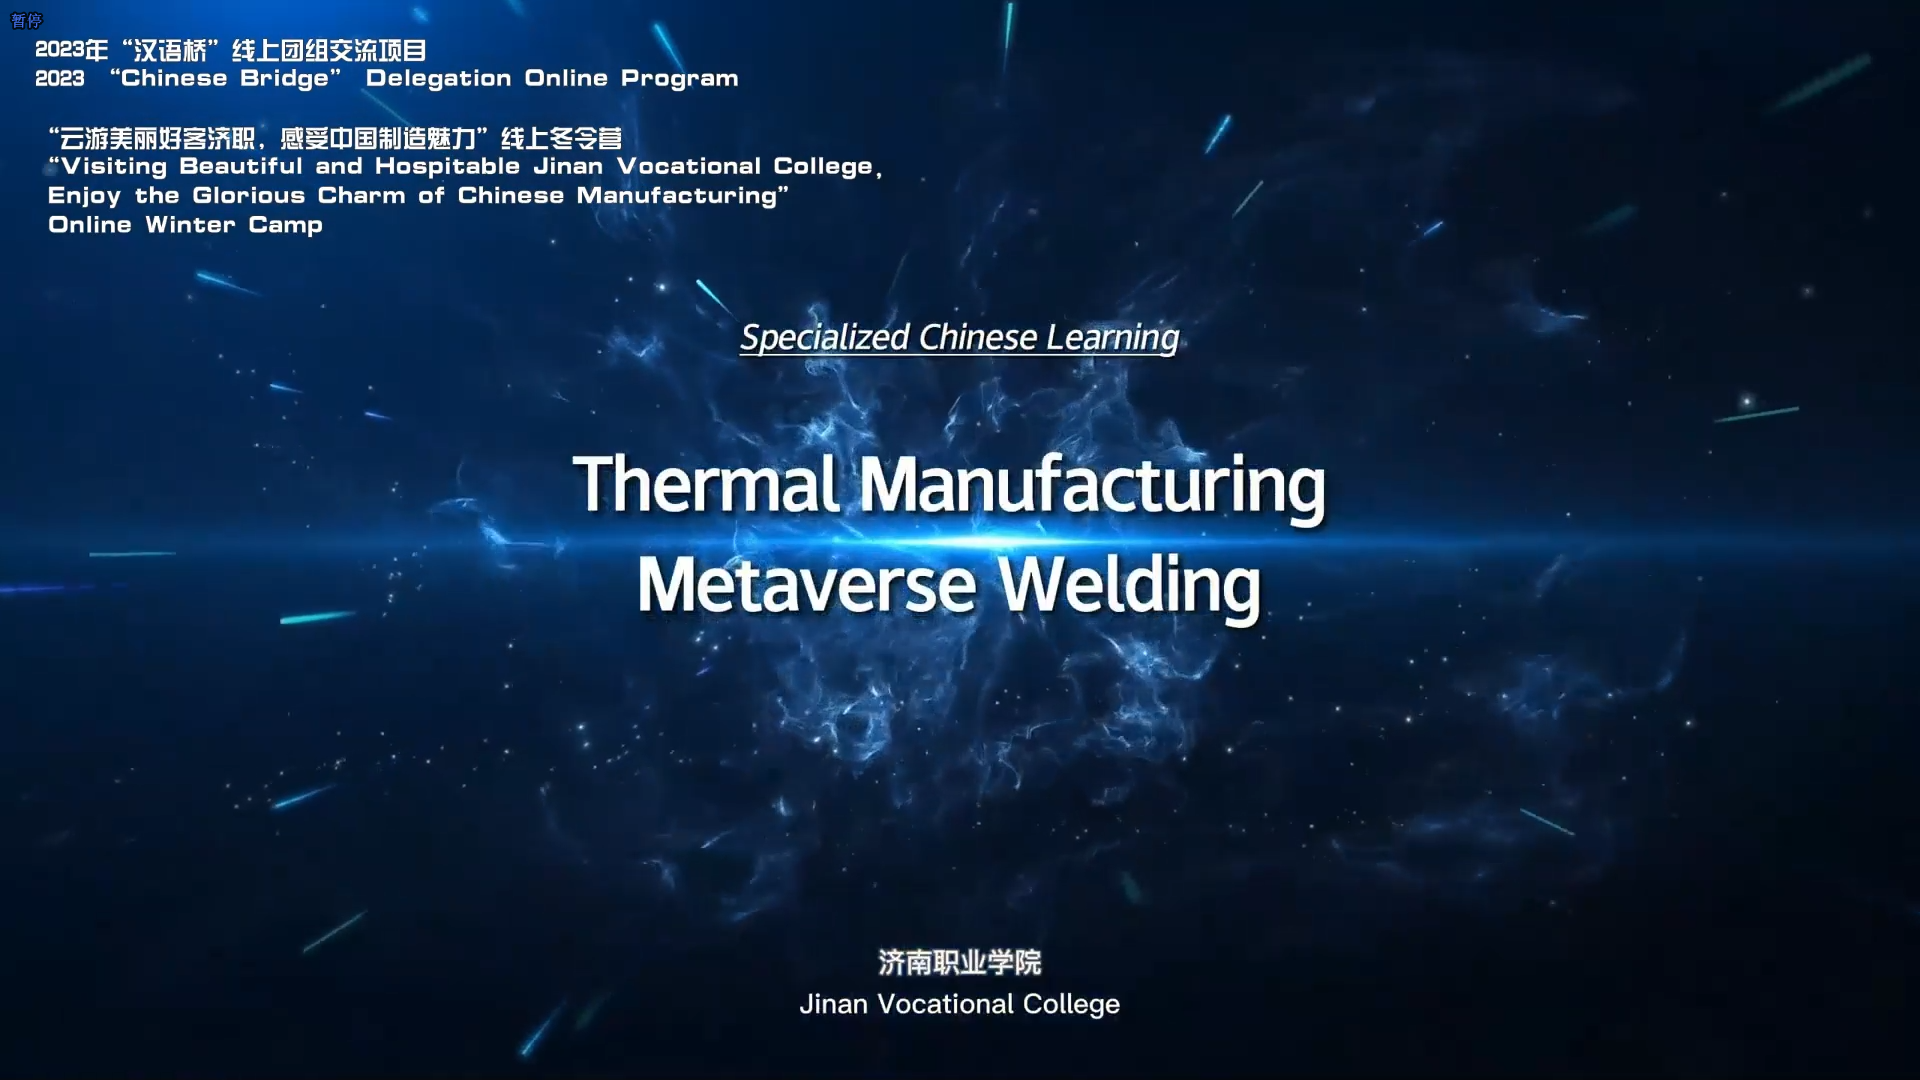 Specialized Chinese Learning - Thermal Manufacturing - Metaverse Welding